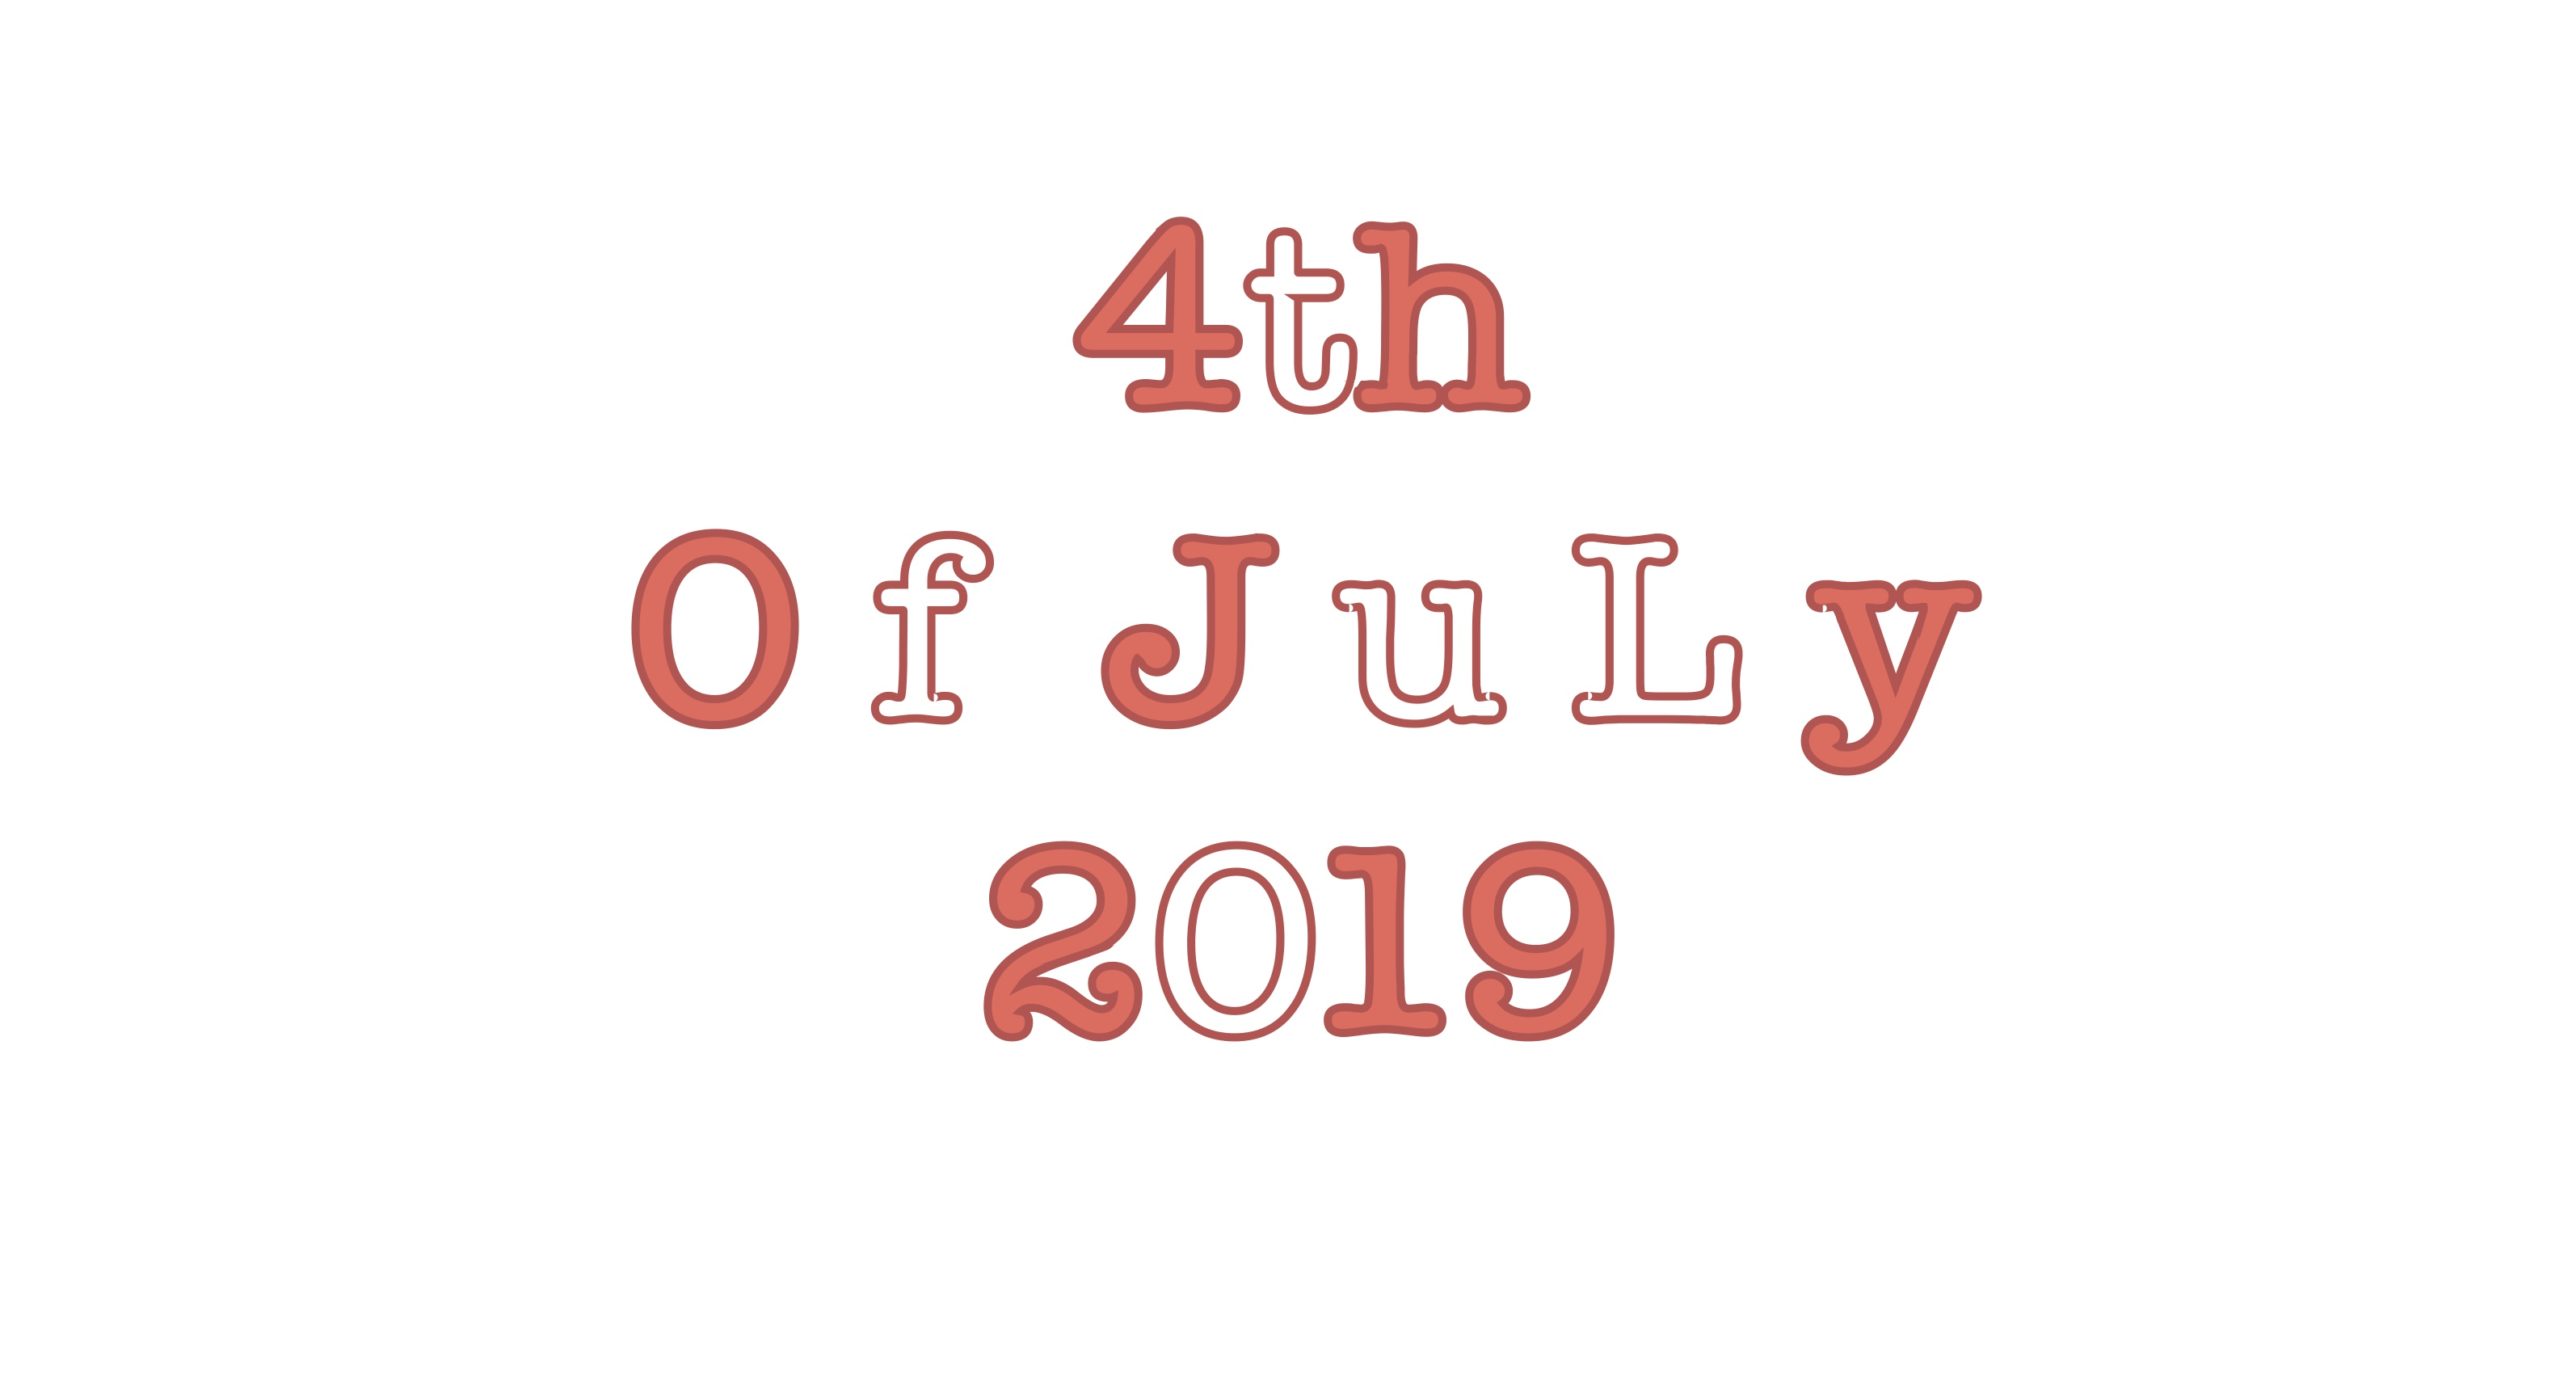 4th of July 2019